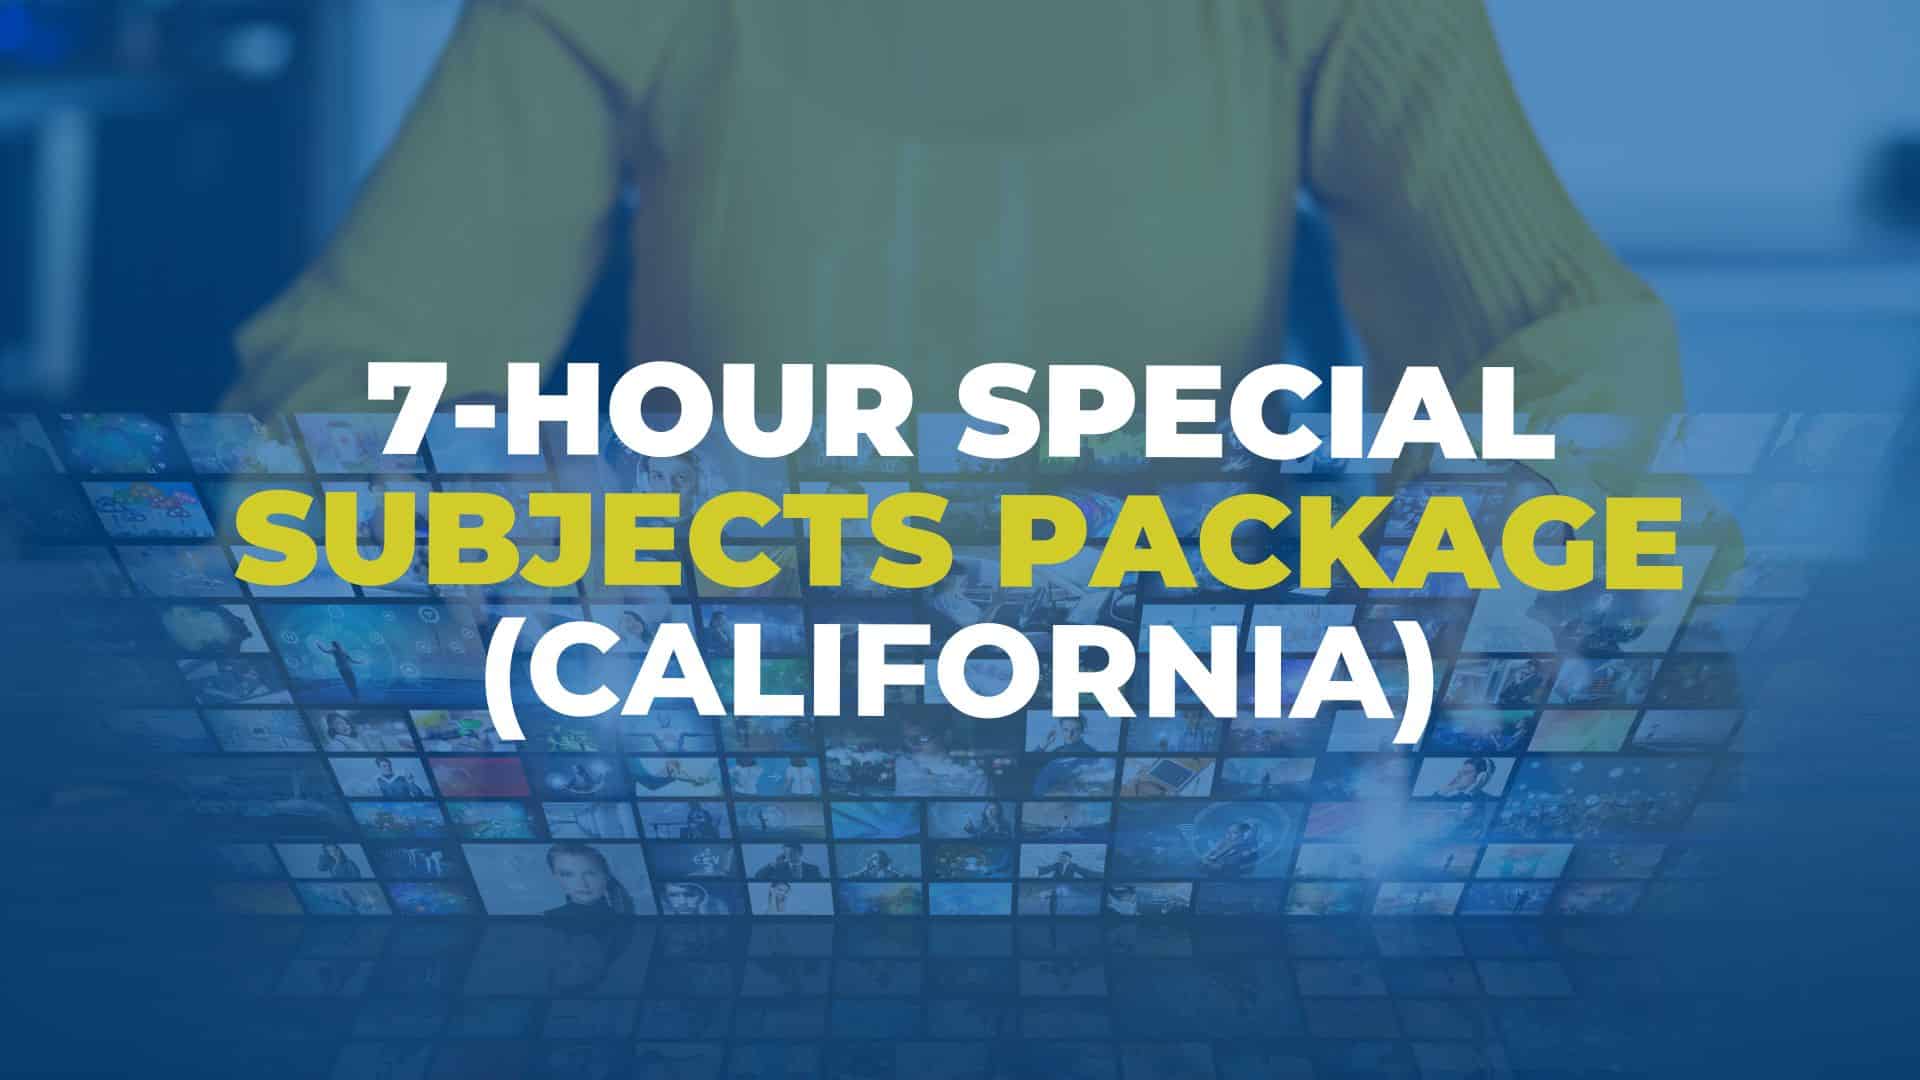 7-Hour Special Subjects Package (California)